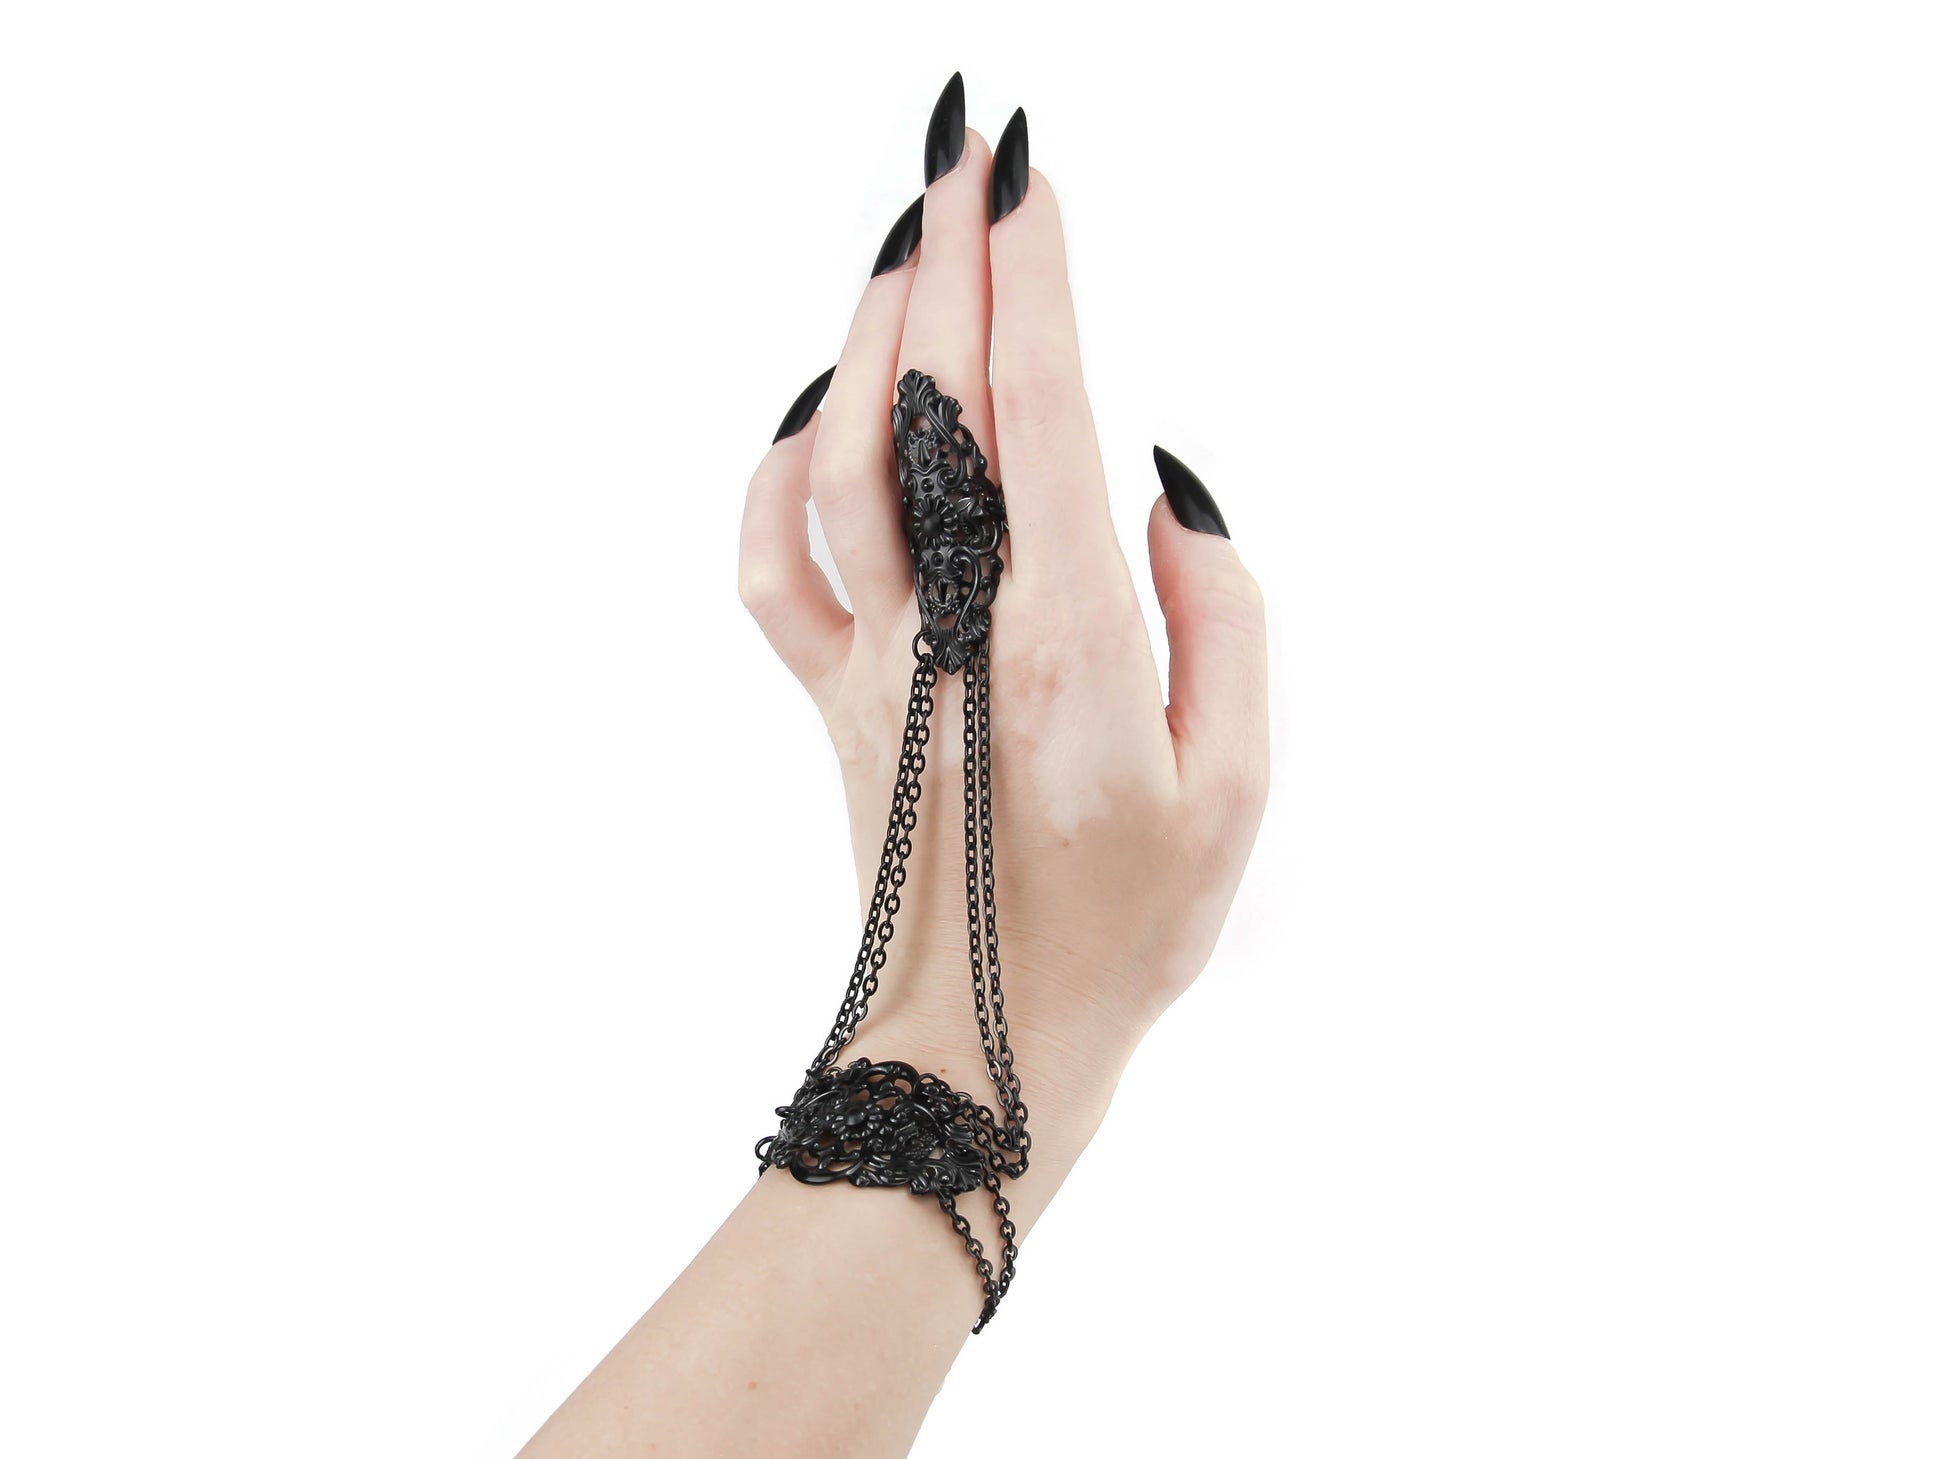 A sophisticated, handcrafted jewelry piece in elegant black is adorned with a gothic design. The back of the hand is covered in detailed filigree metalwork, with graceful chains connecting the bracelet part to the ring on the middle finger. The hand is shown with sharply pointed black manicured nails, adding to the dark allure of the piece. The white background accentuates its beauty and sophistication.